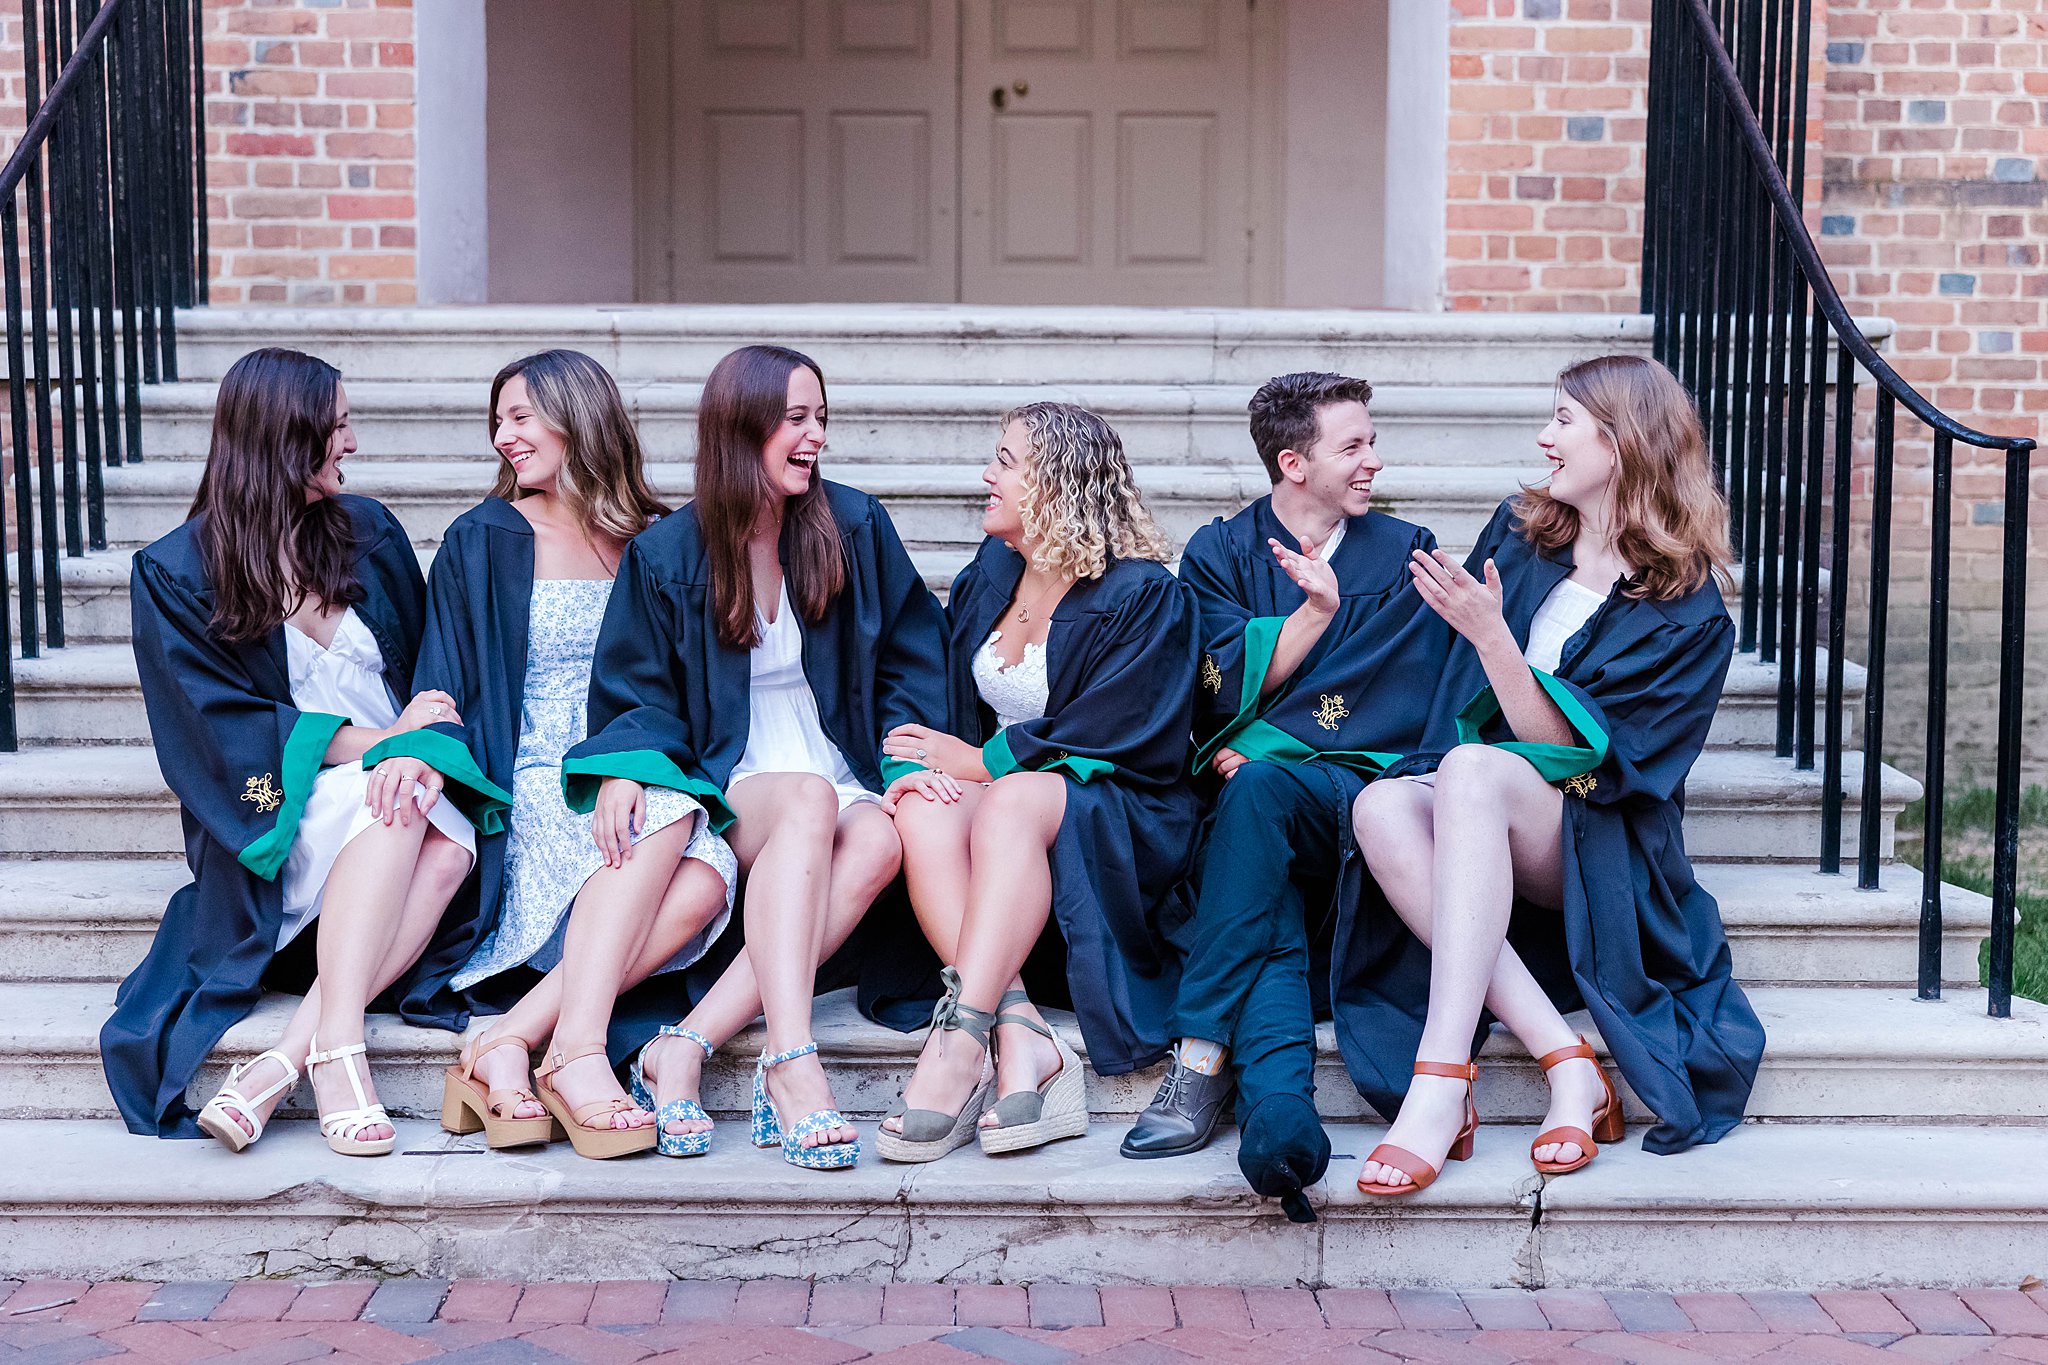 William and Mary seniors laughing in front of Wren Building on campus